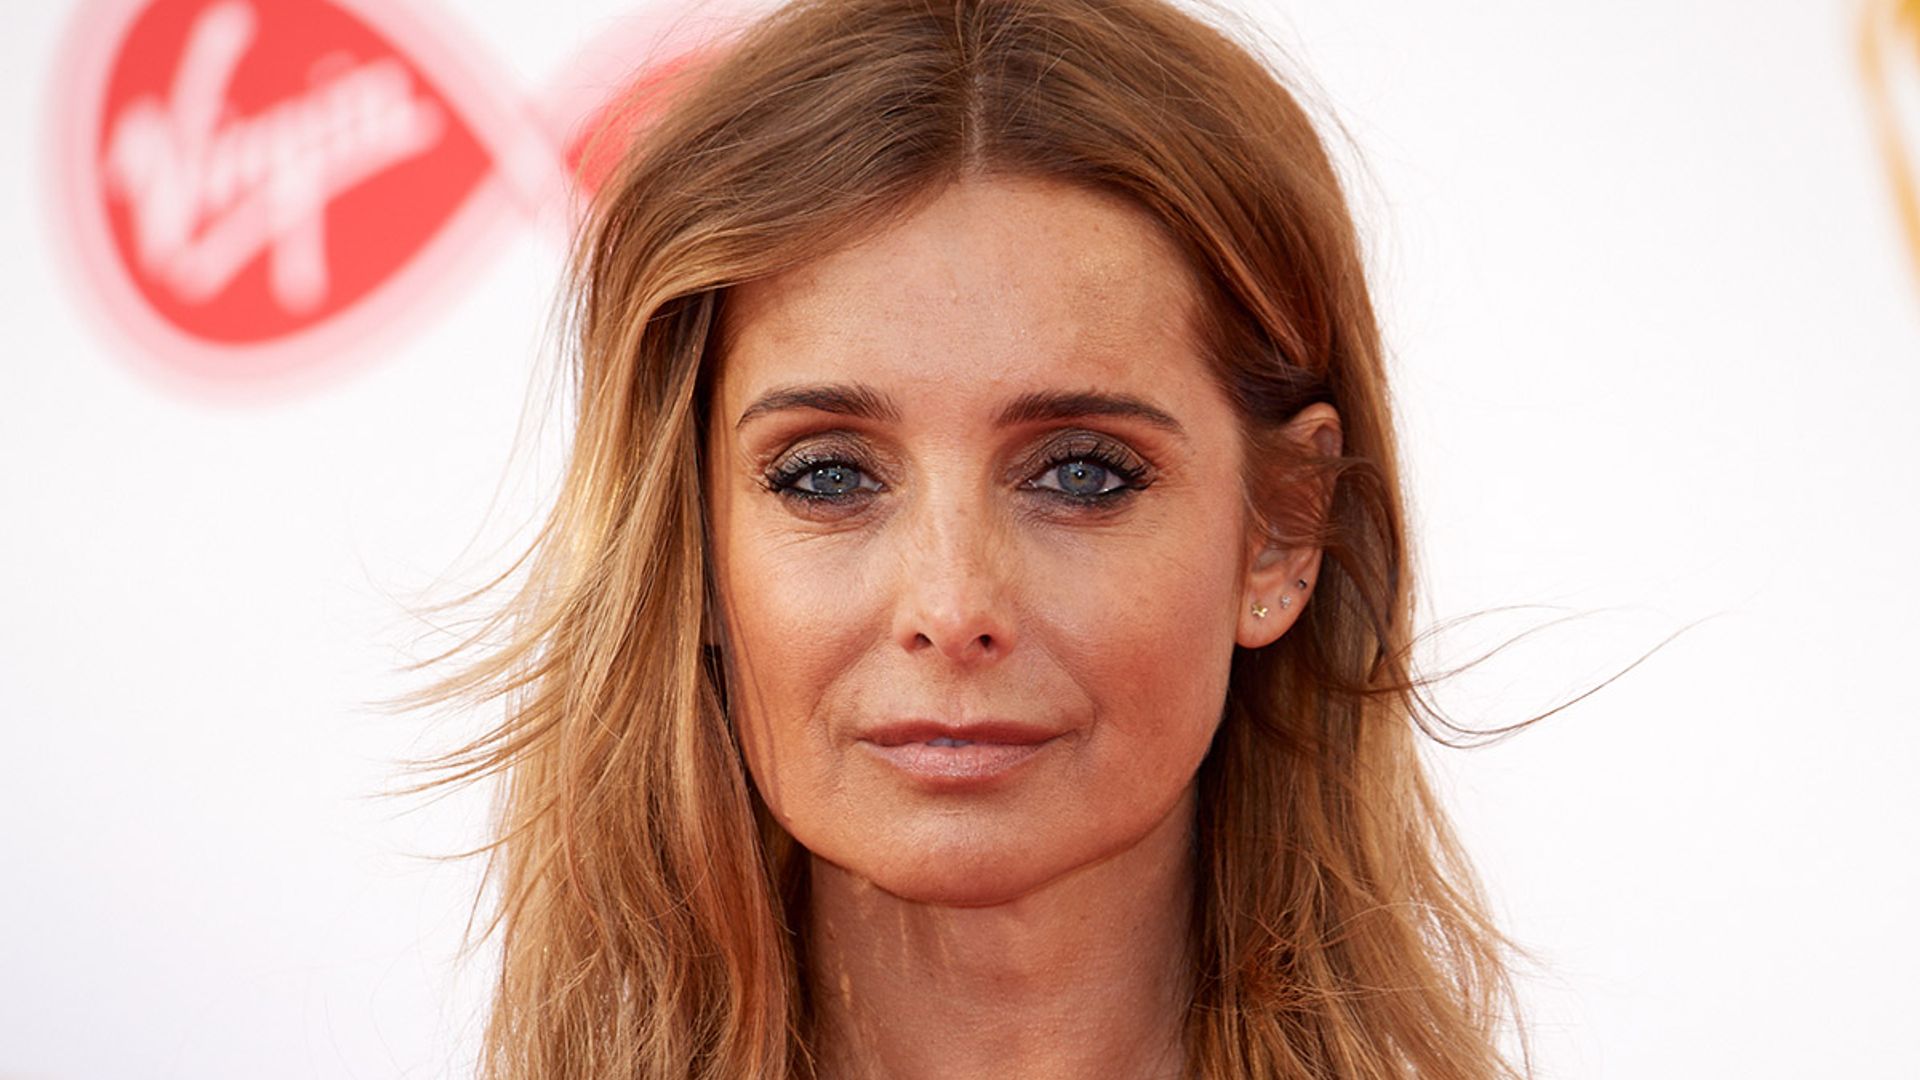 Louise Redknapp stuns with daring pose in off-the-shoulder look